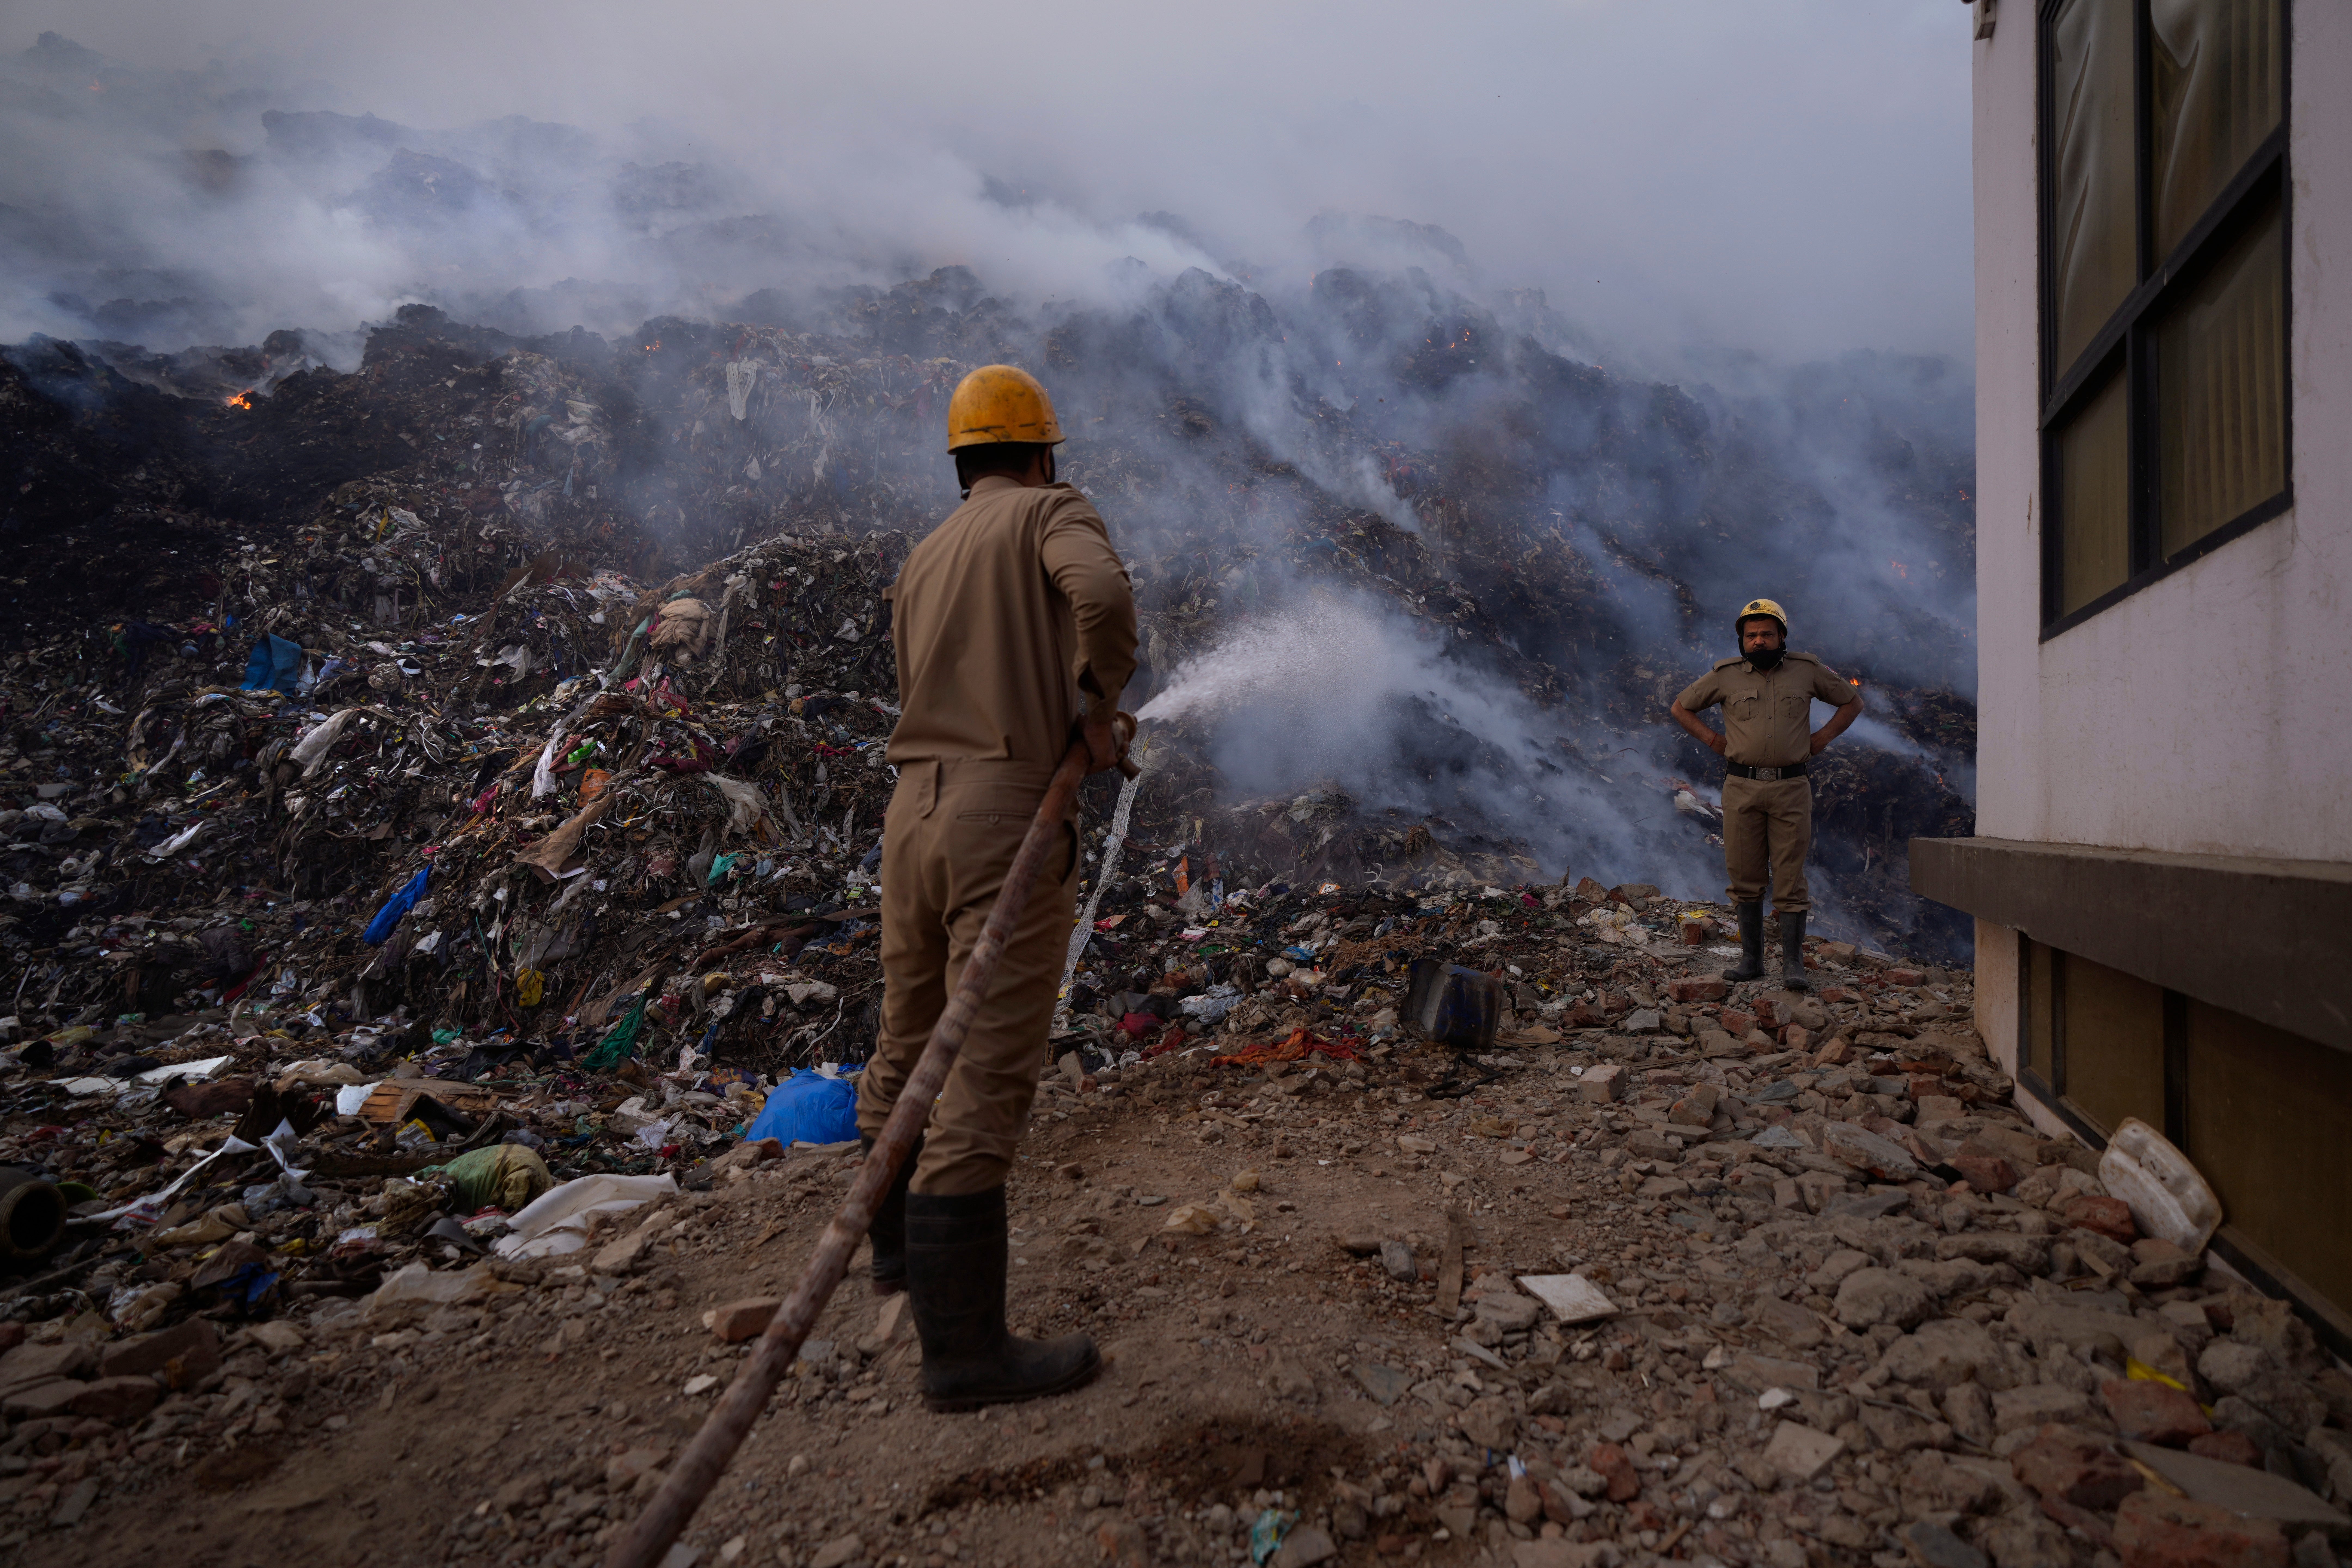 Fire officials try to douse a fire at the Bhalswa landfill in New Delhi, India, Wednesday, April 27, 2022. (Photo: Manish Swarup, AP)